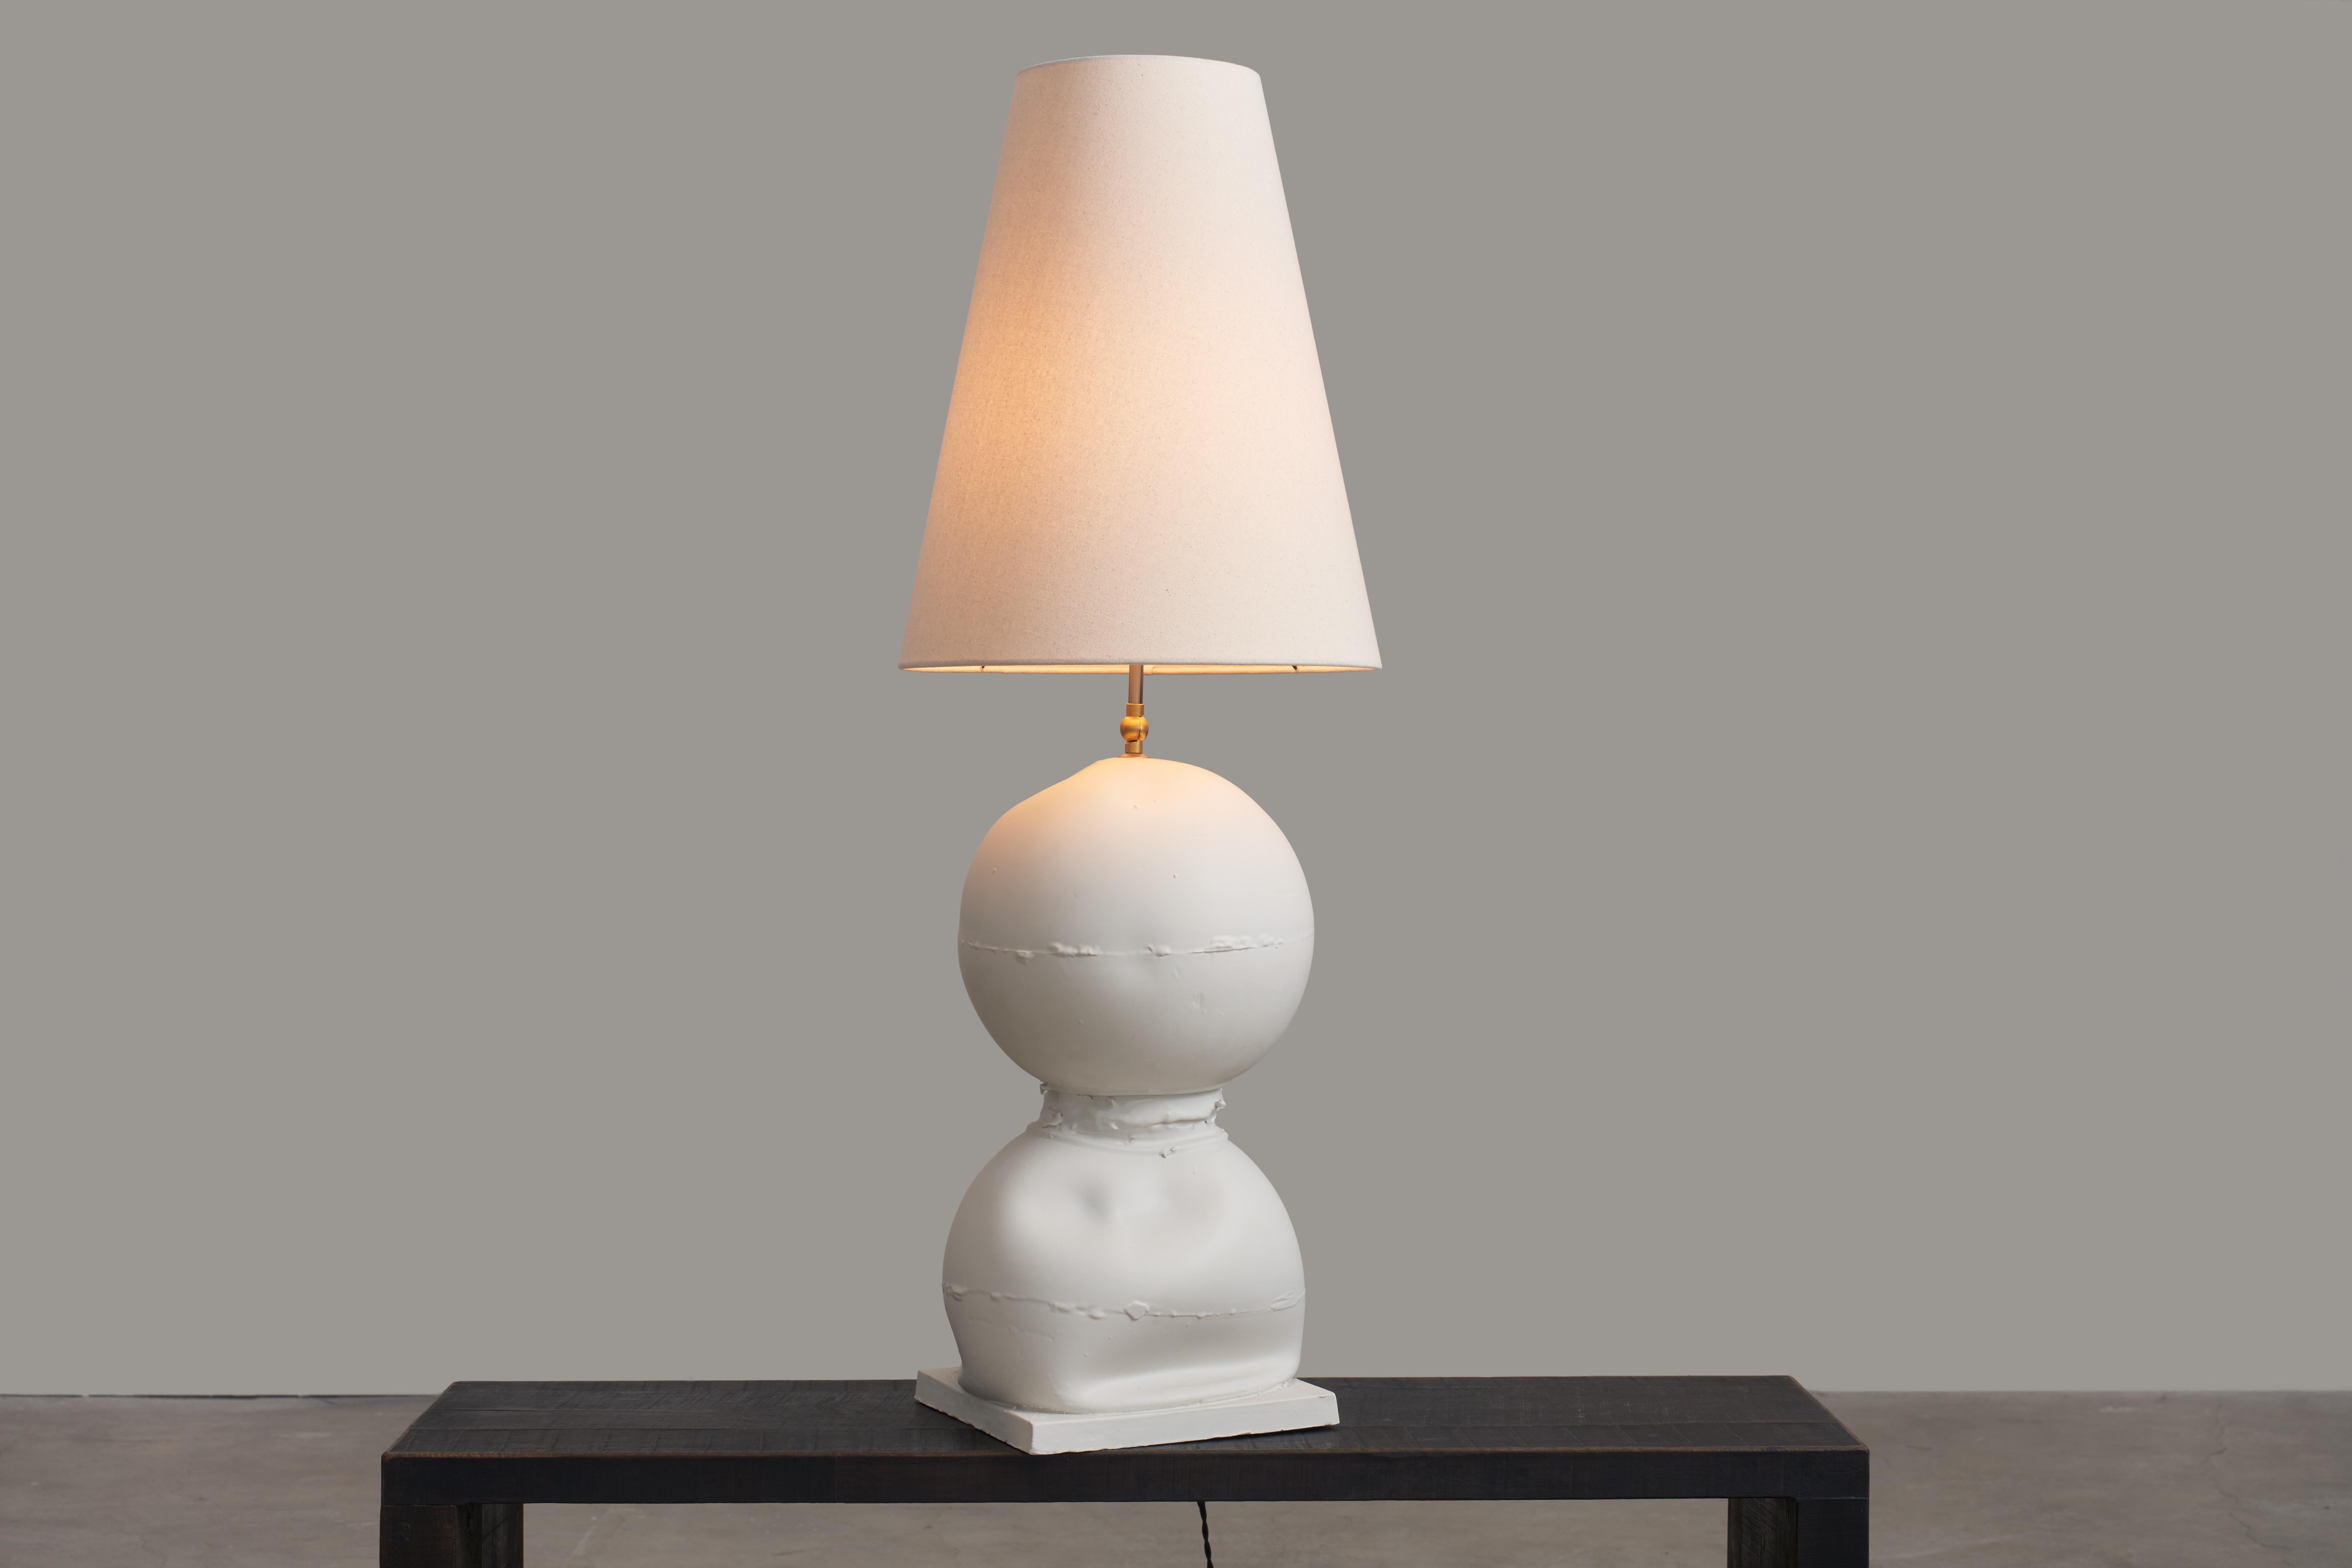 The Cassola+Cassola is a handmade ceramic lamp and part of a project entitled Break the Mold by artist Jenna Basso Pietrobon. Made in her family’s hometown of Nove di Bassano (an hour drive from Venice, Italy). Each lamp is unique and the lampshade